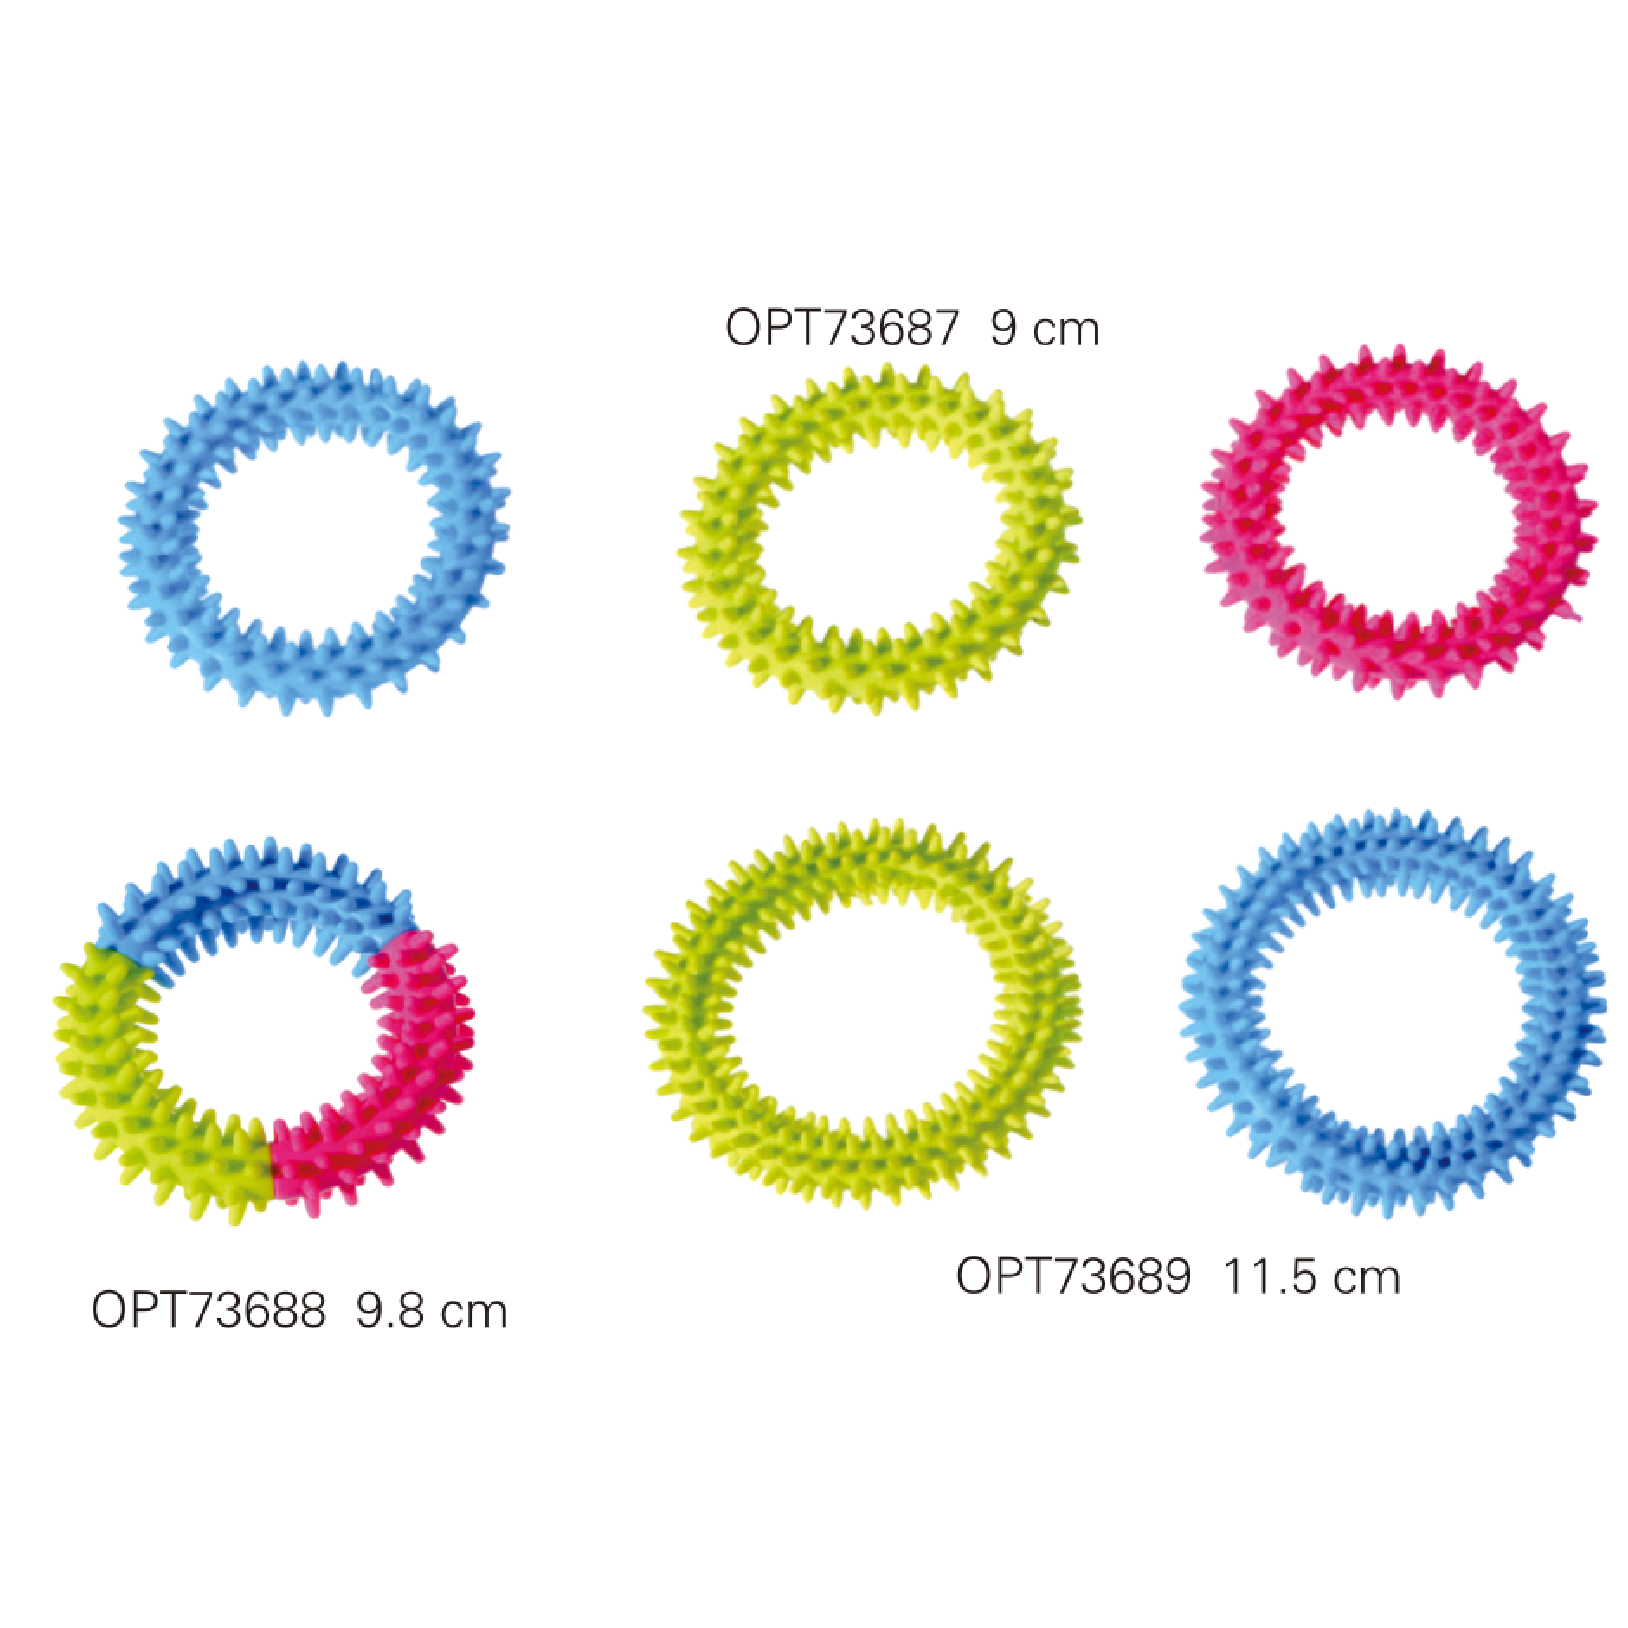 OPT73687-OPT73689 Dog toy rubber